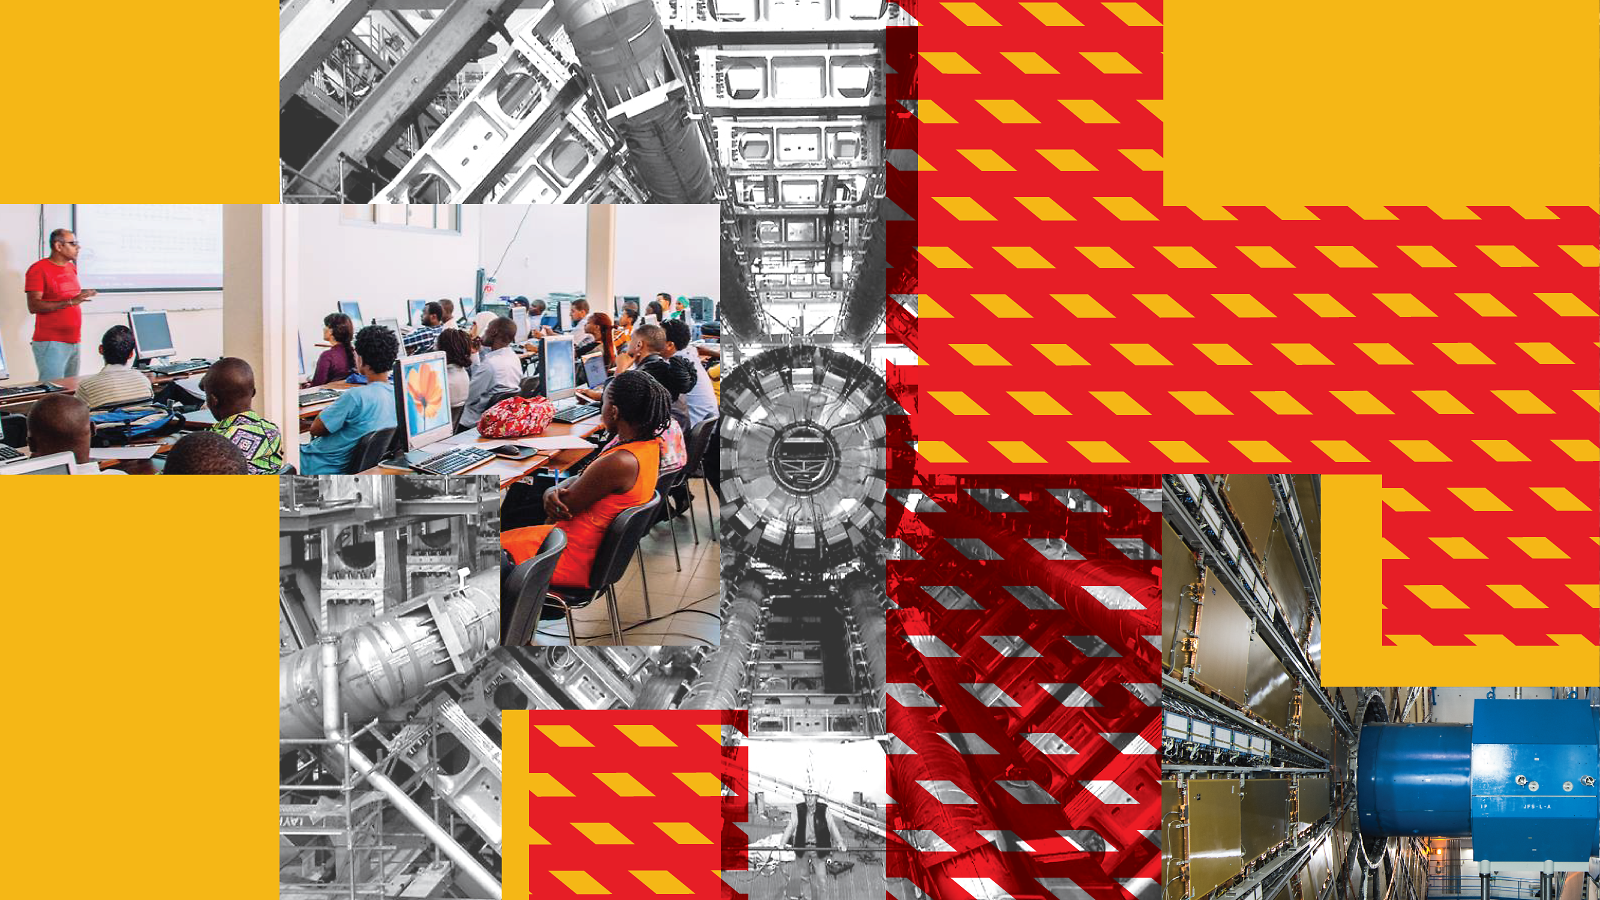 Yellow and red collage of ATLAS machine and students in classroom